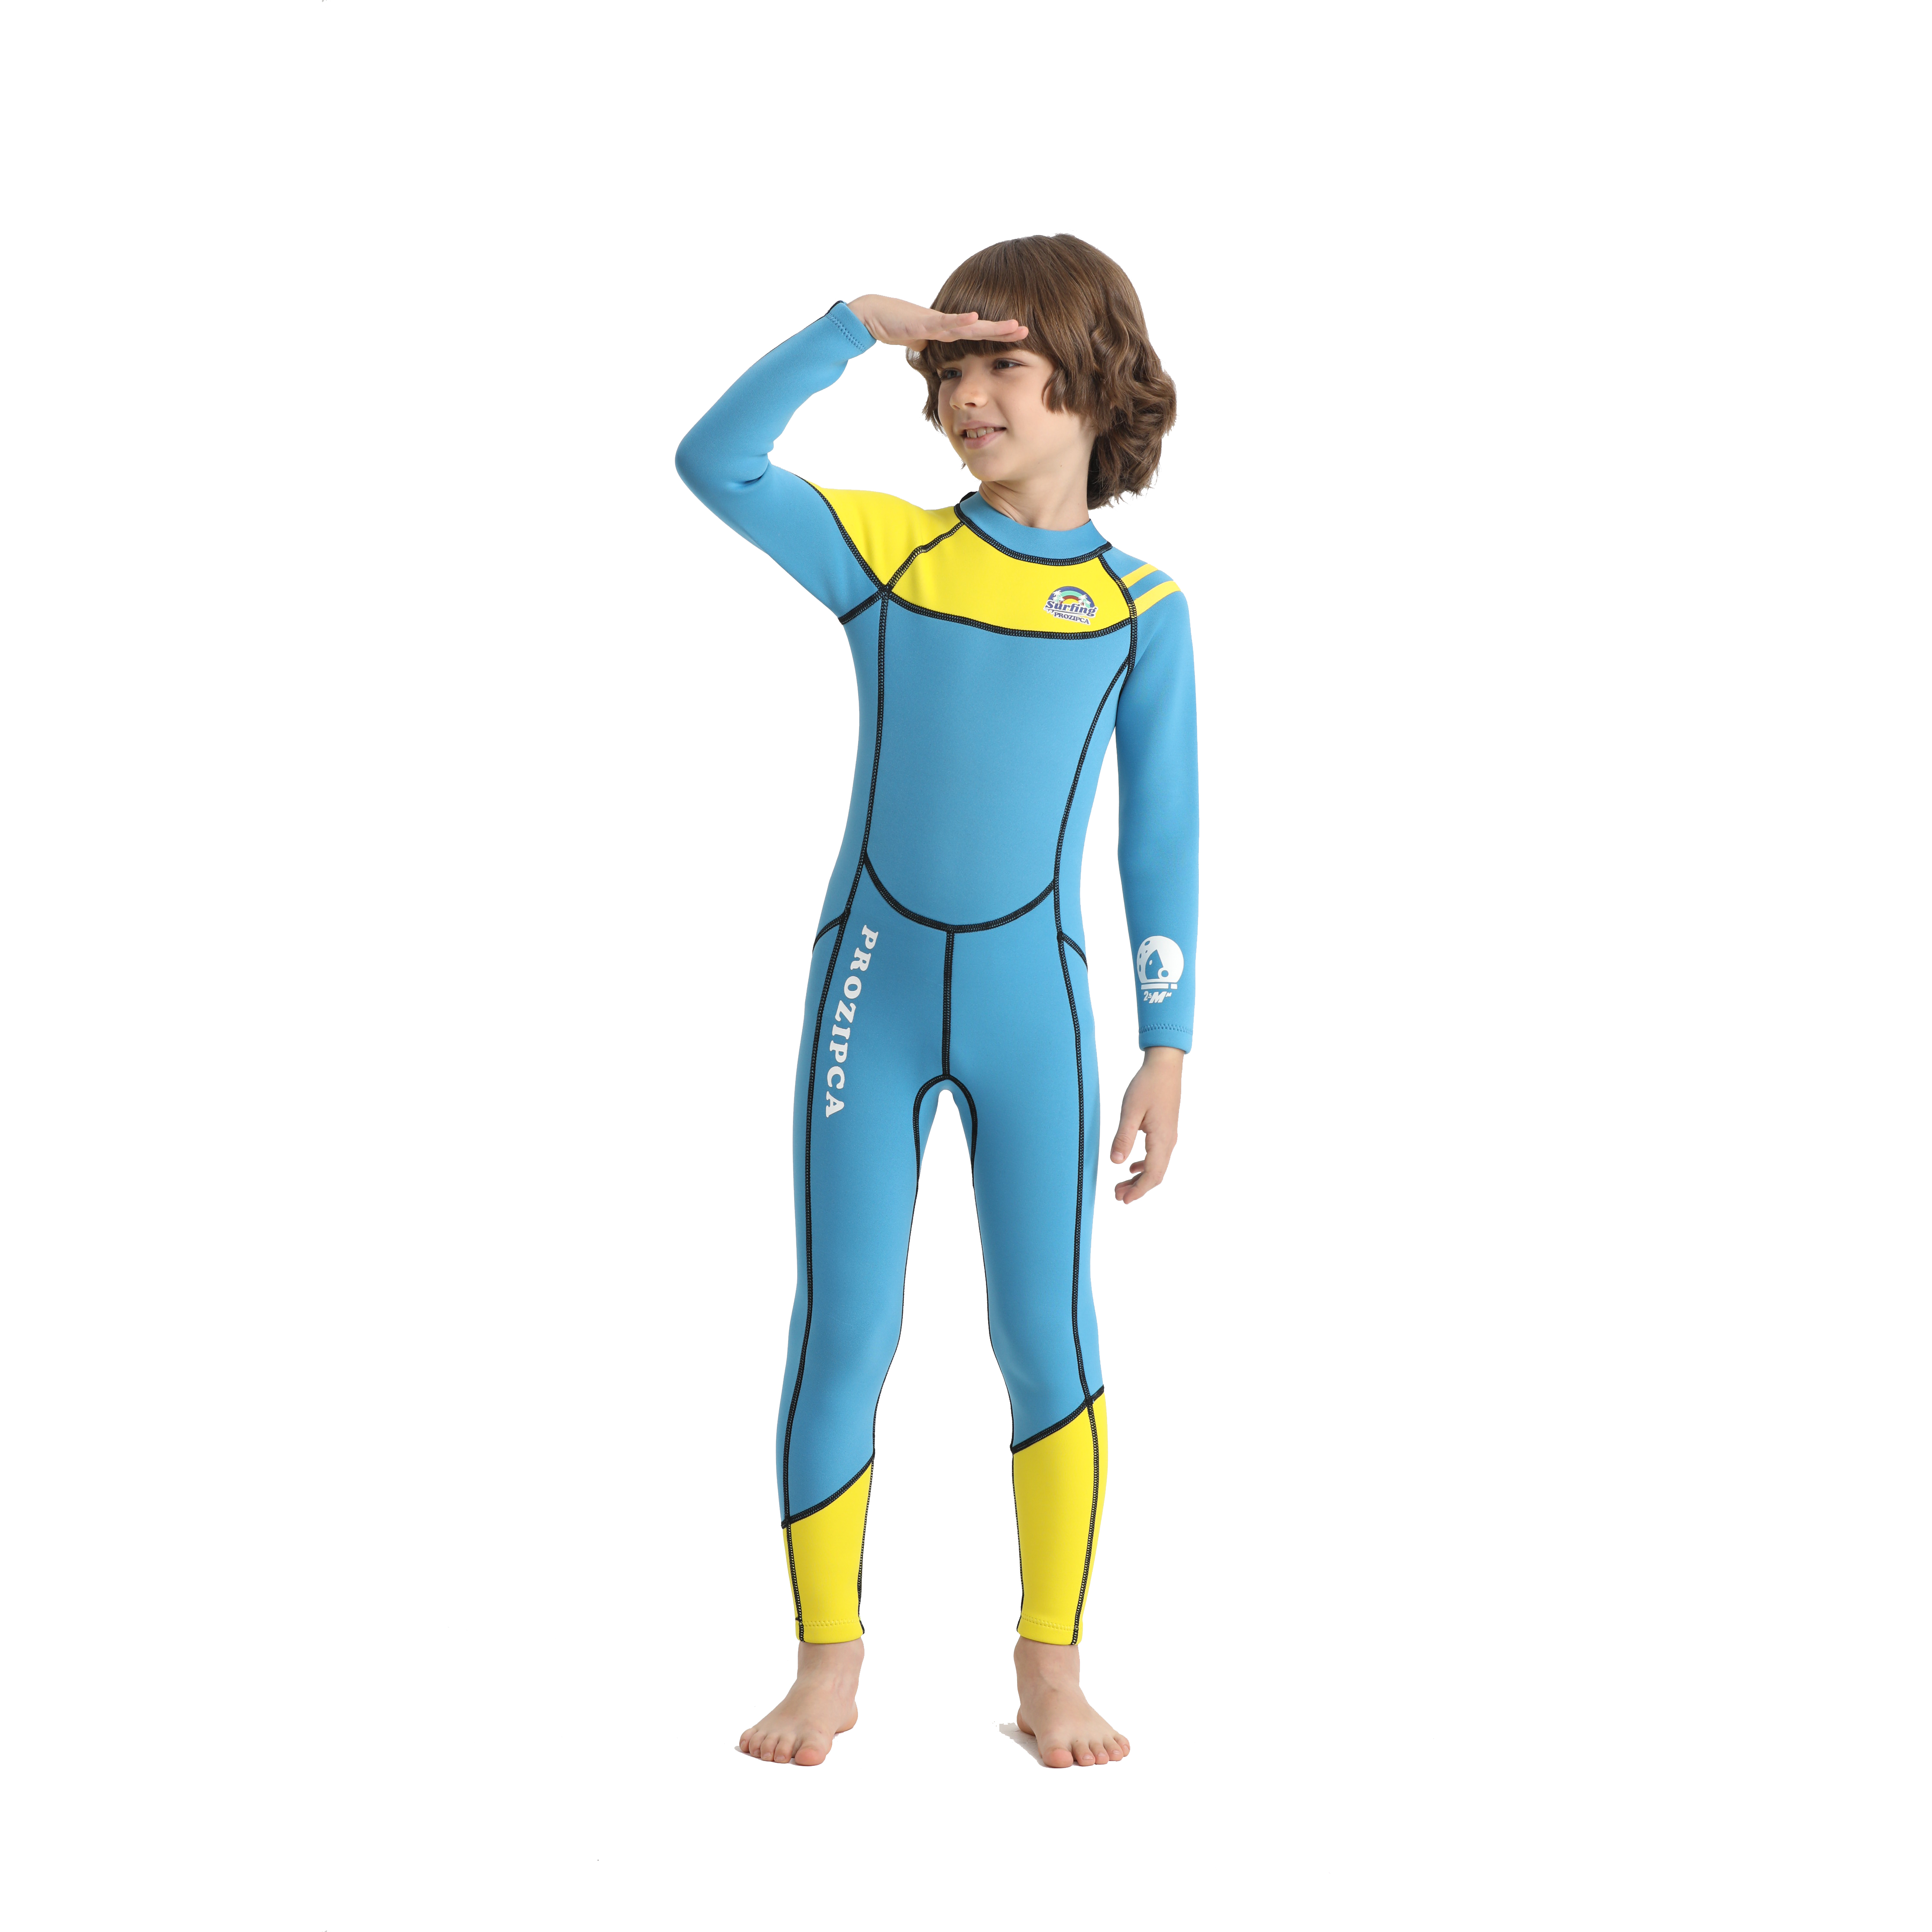 Customized Long Sleeve Children Swimming Snorkeling Diving Suits 3Mm Neoprene One Piece Kids Surfing Wetsuit